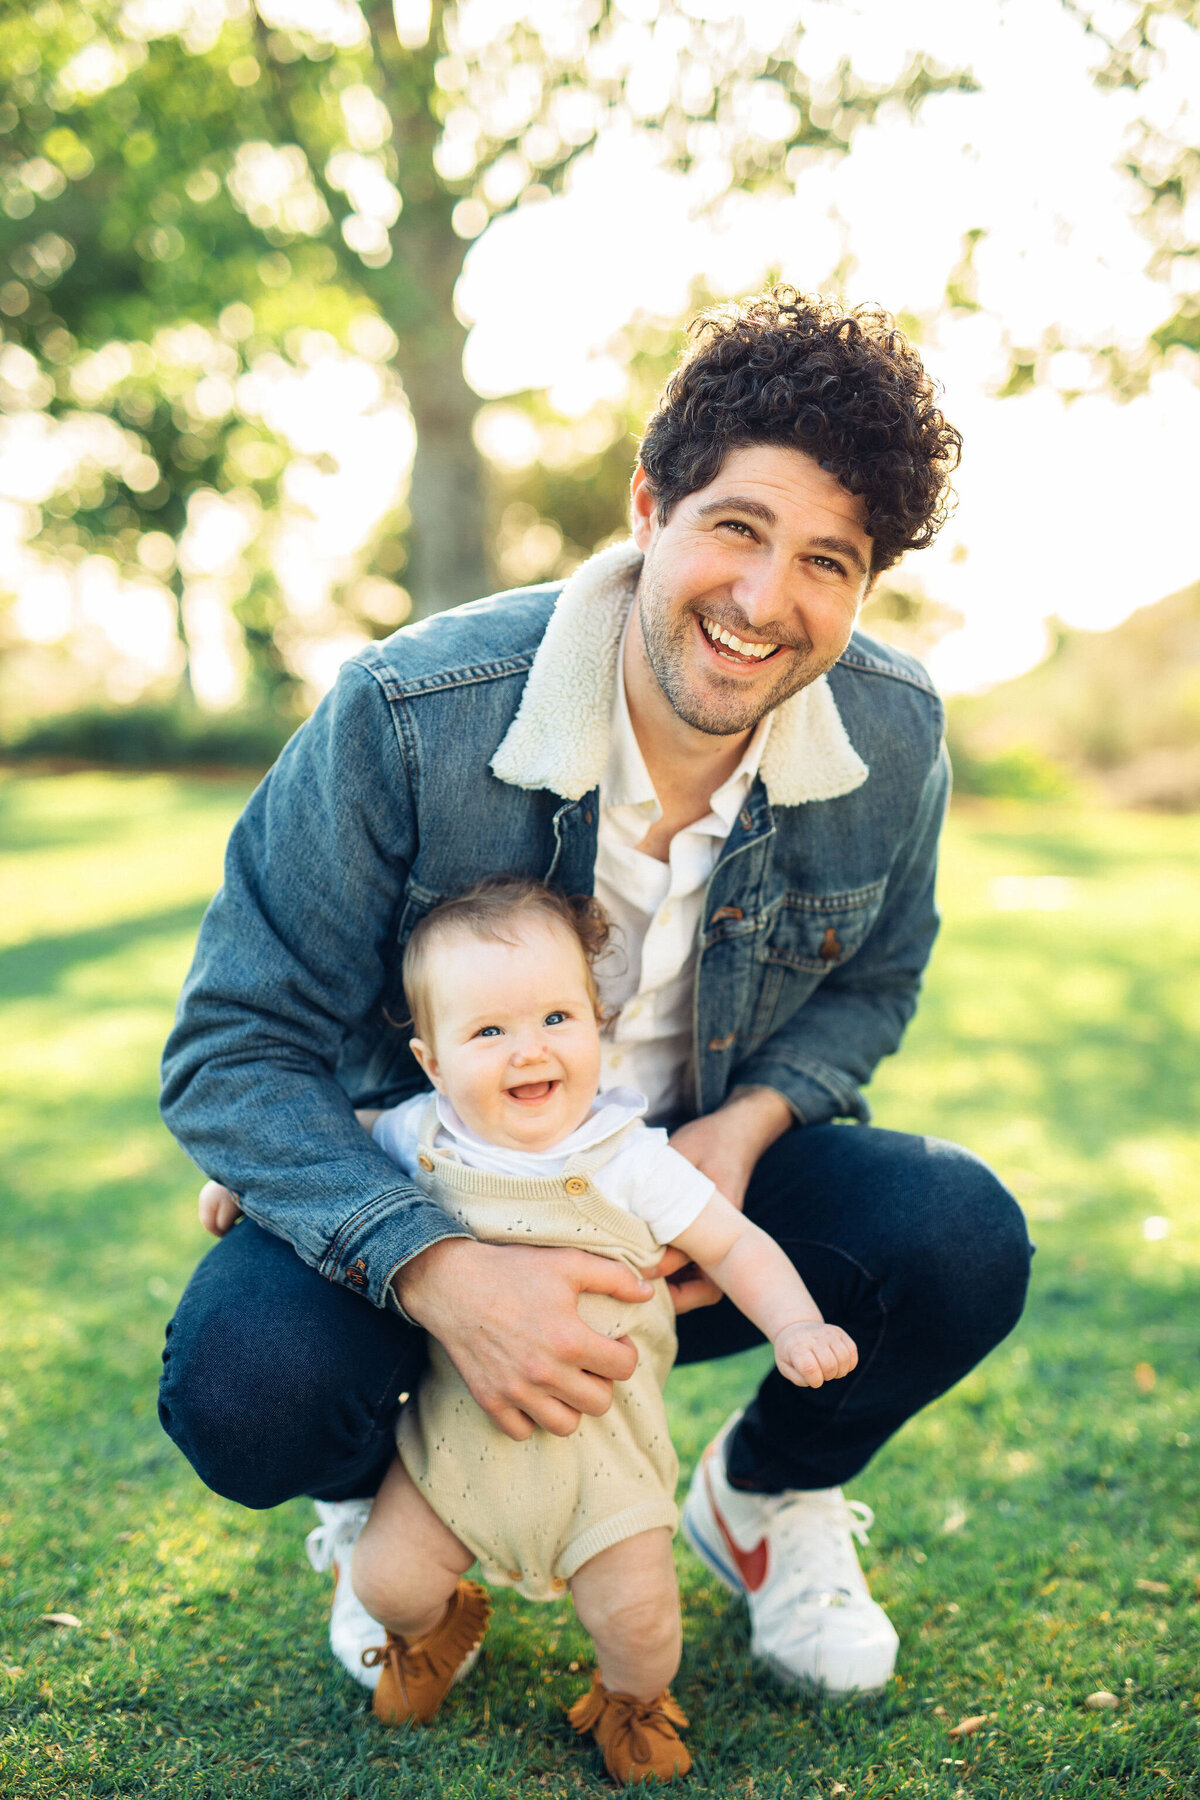 Family Portrait Photo Of Father Smiling With His Baby In Los Angeles